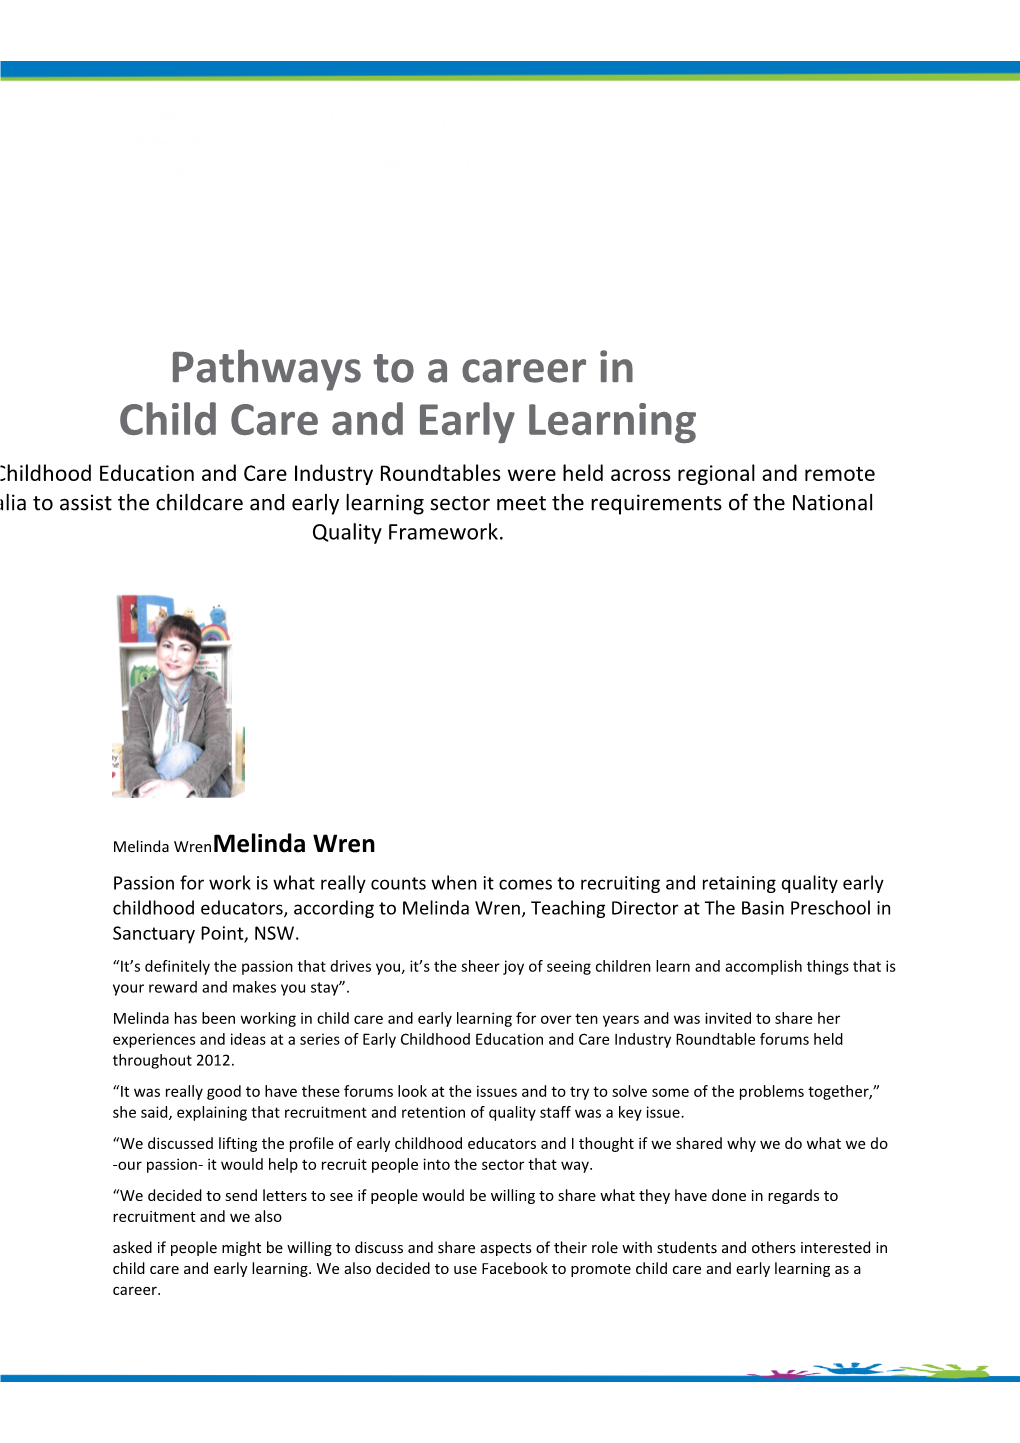 Pathways to a Career in Child Care and Early Learning